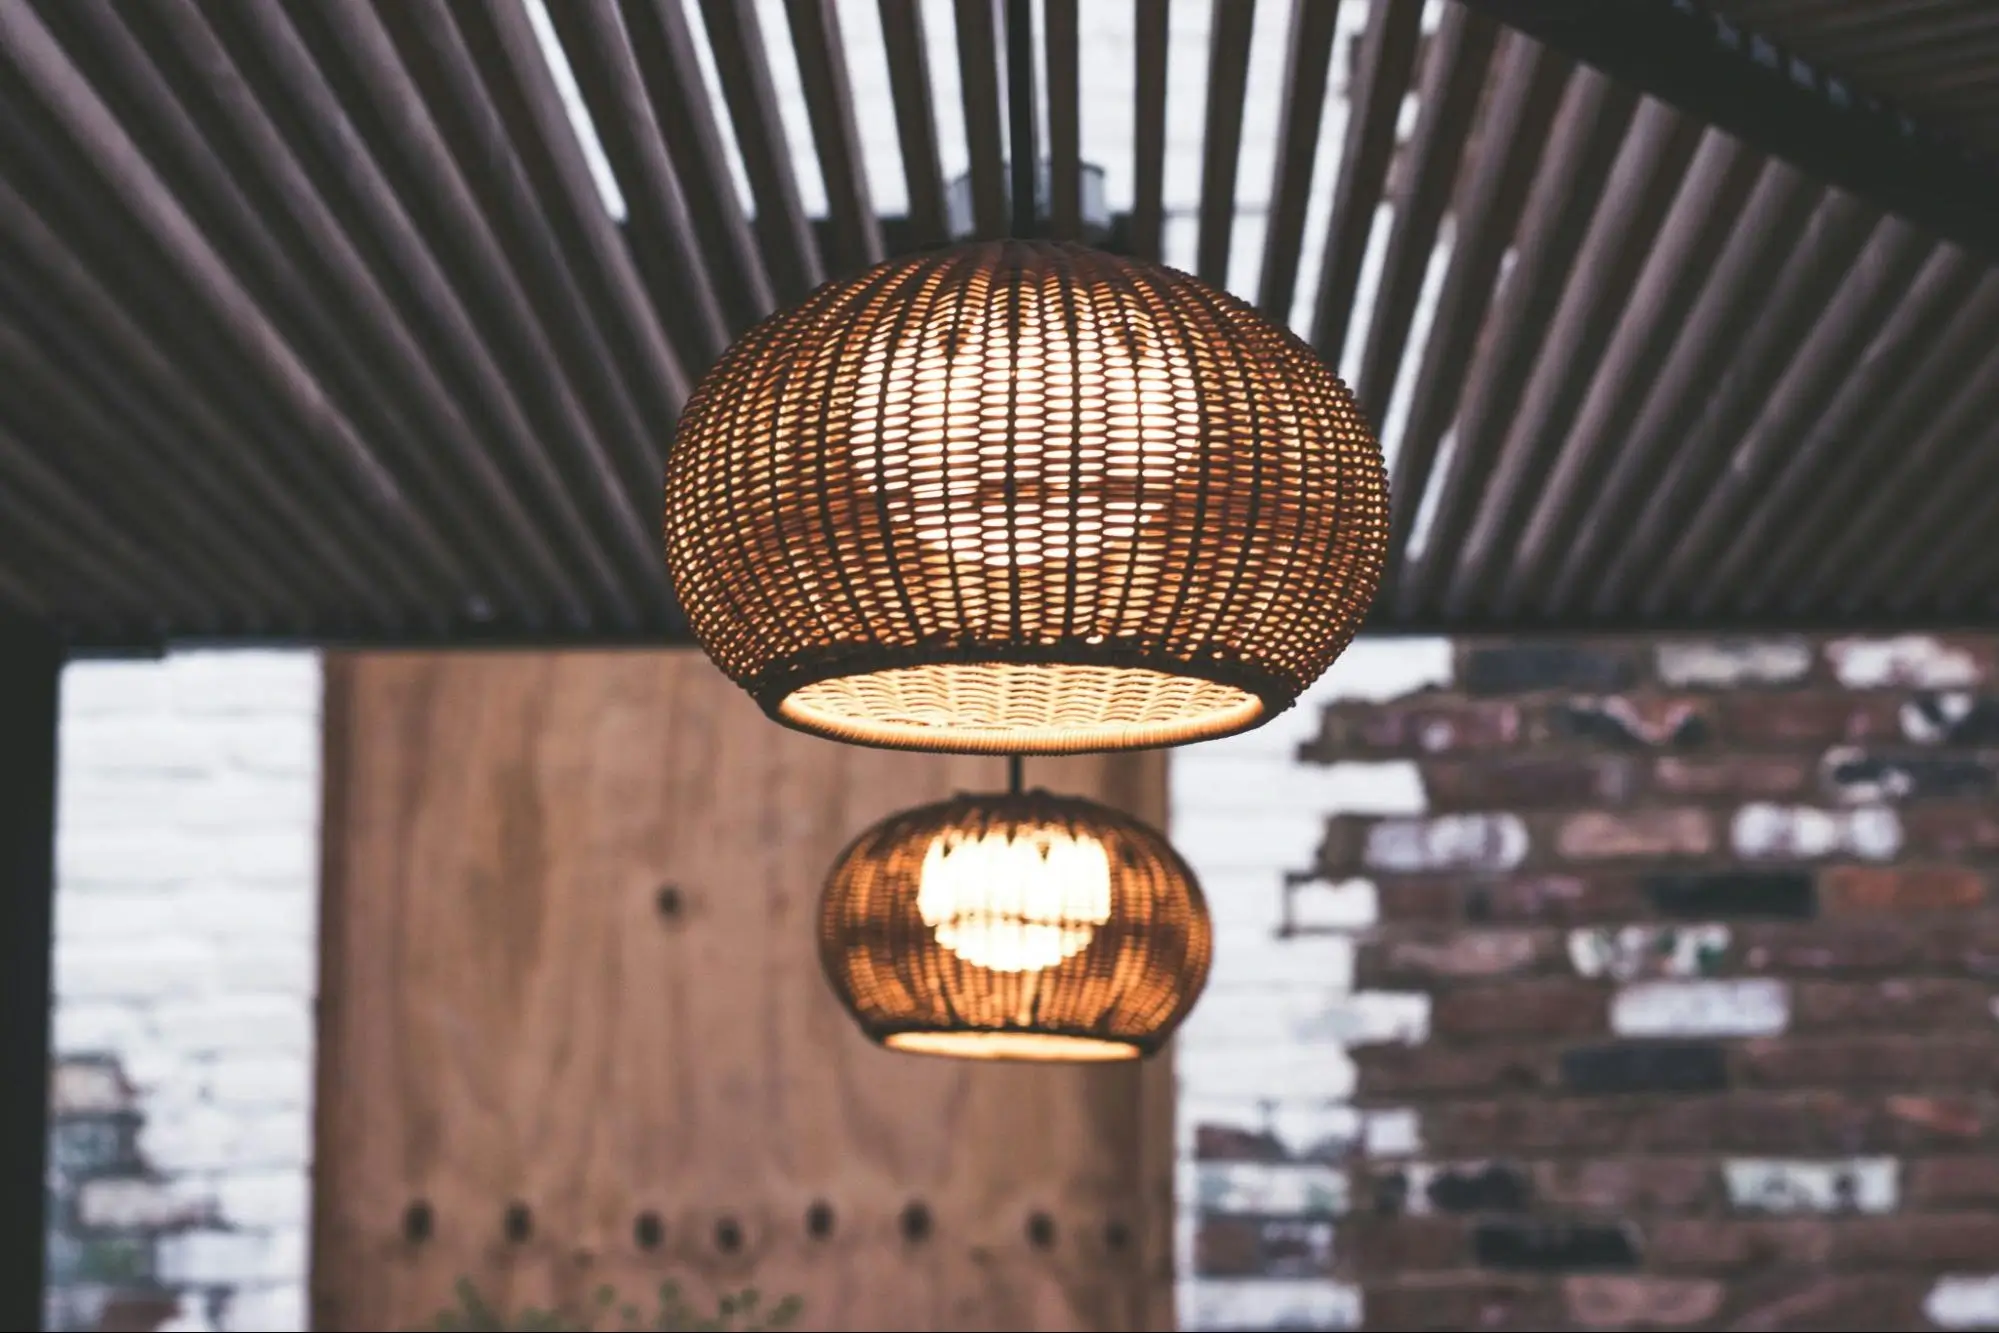 two woven pendant light fixtures hang from a patio ceiling.